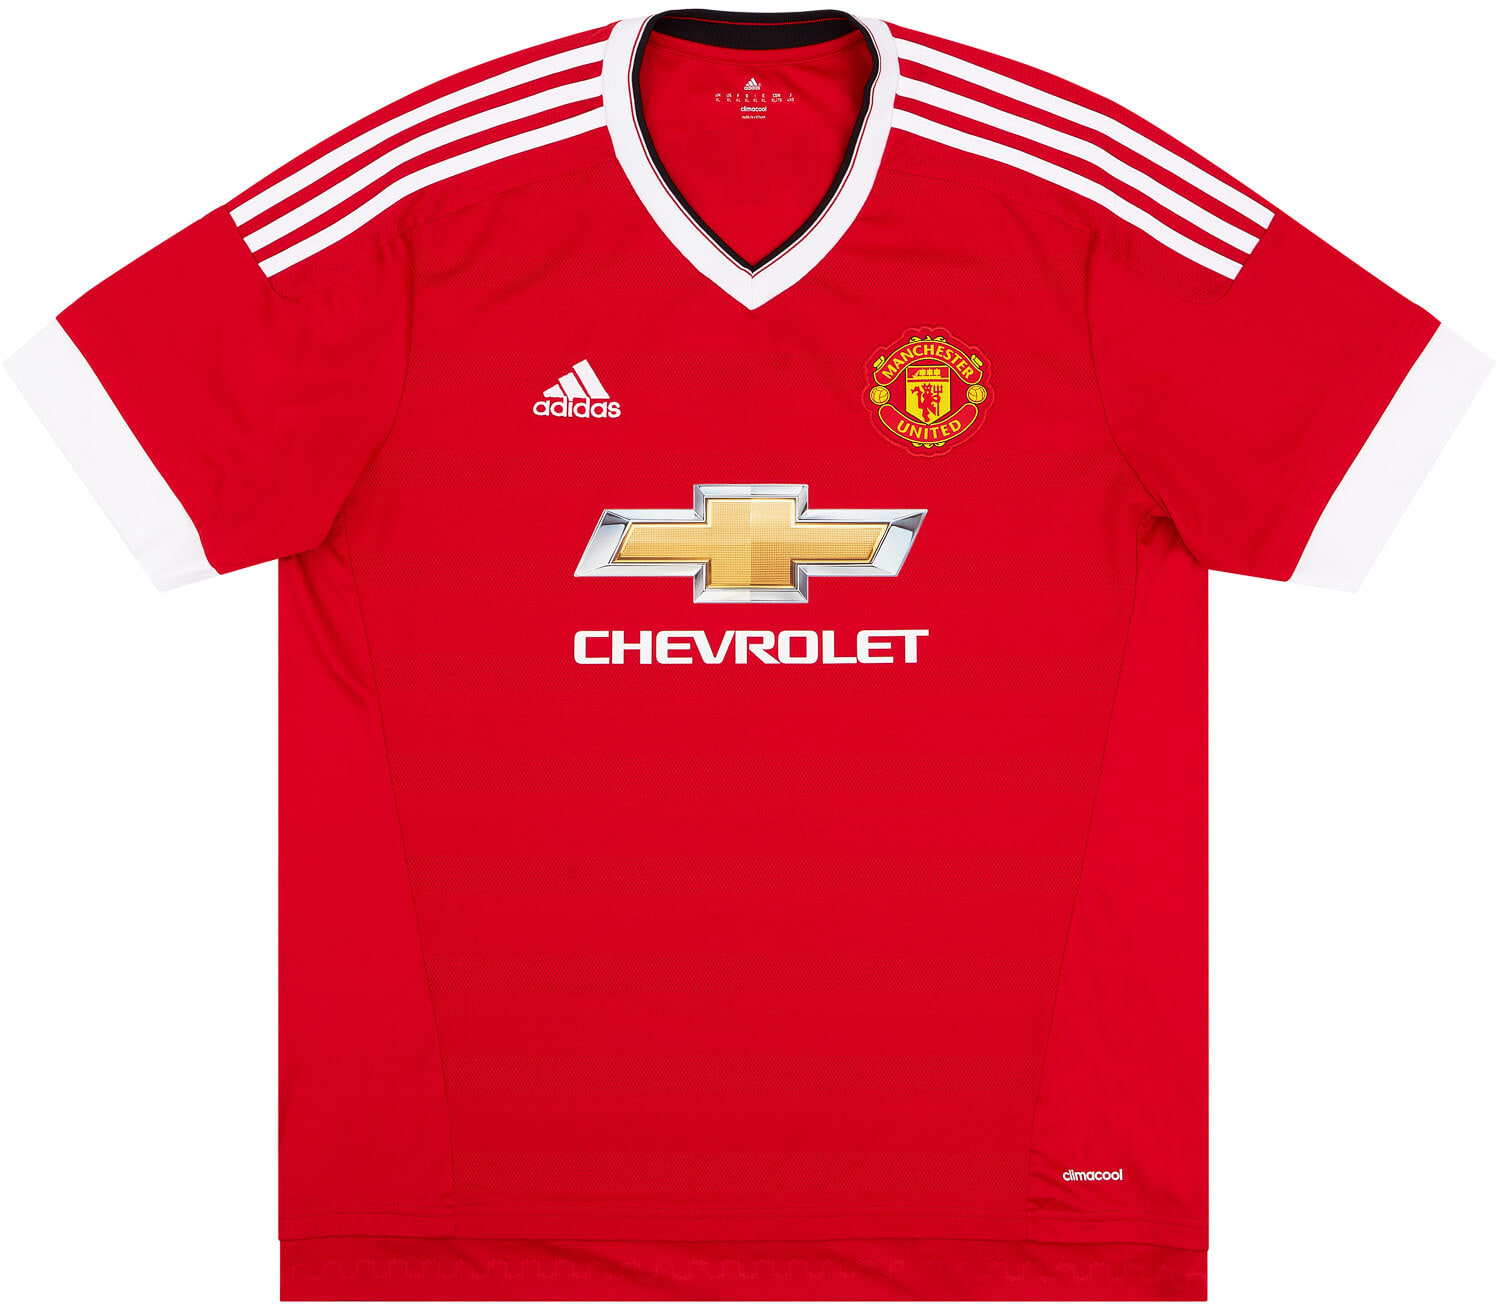 2015-16 Manchester United Home Shirt - 6/10 - ()